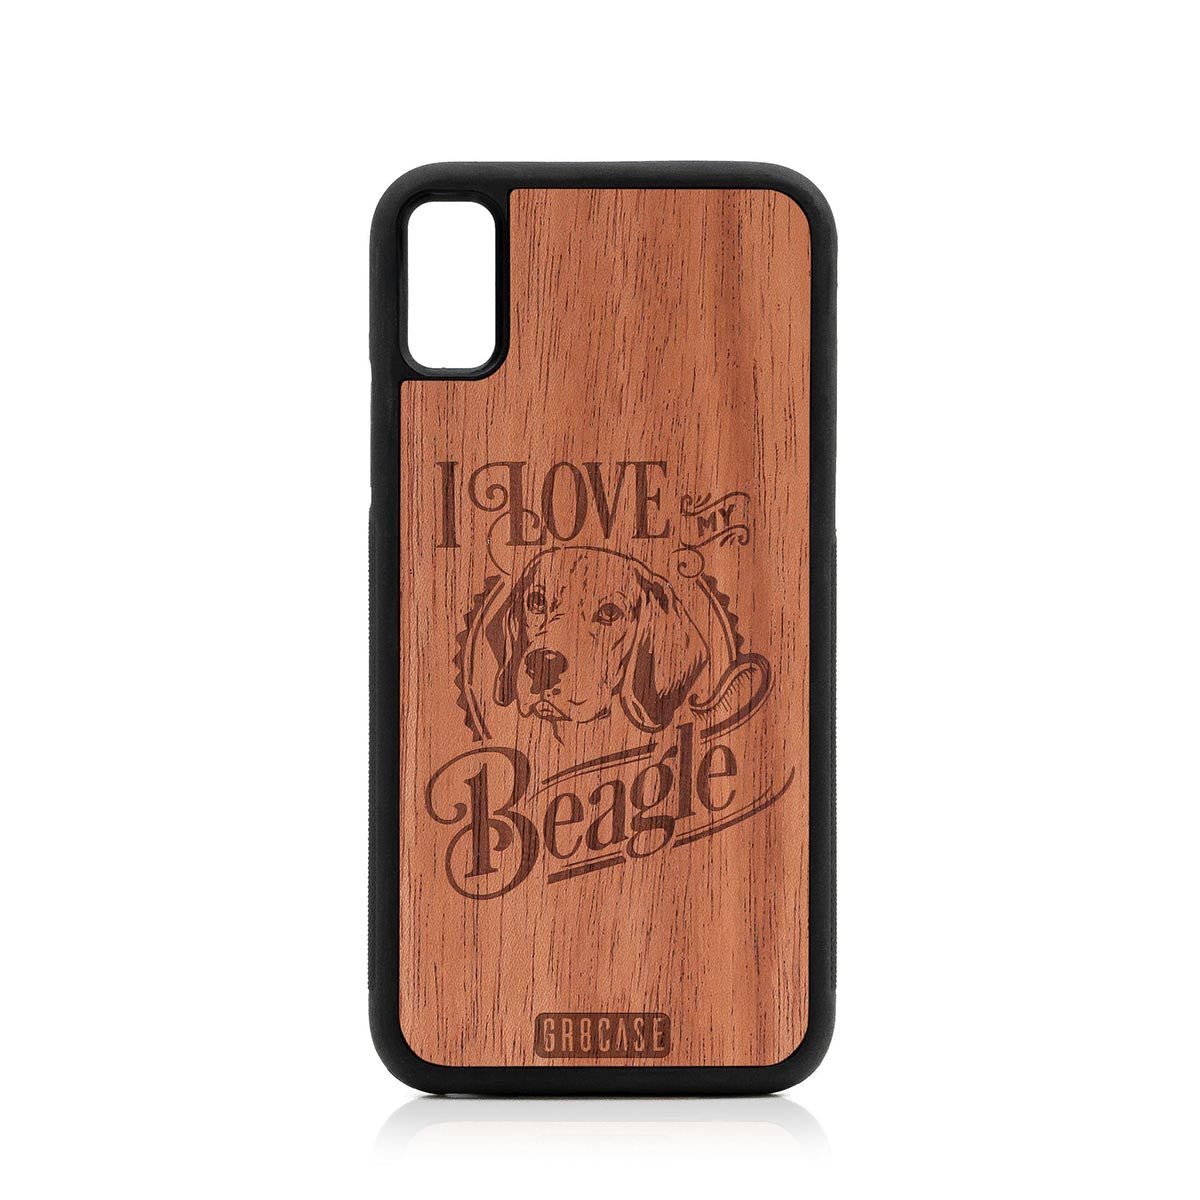 I Love My Beagle Design Wood Case For iPhone X/XS by GR8CASE